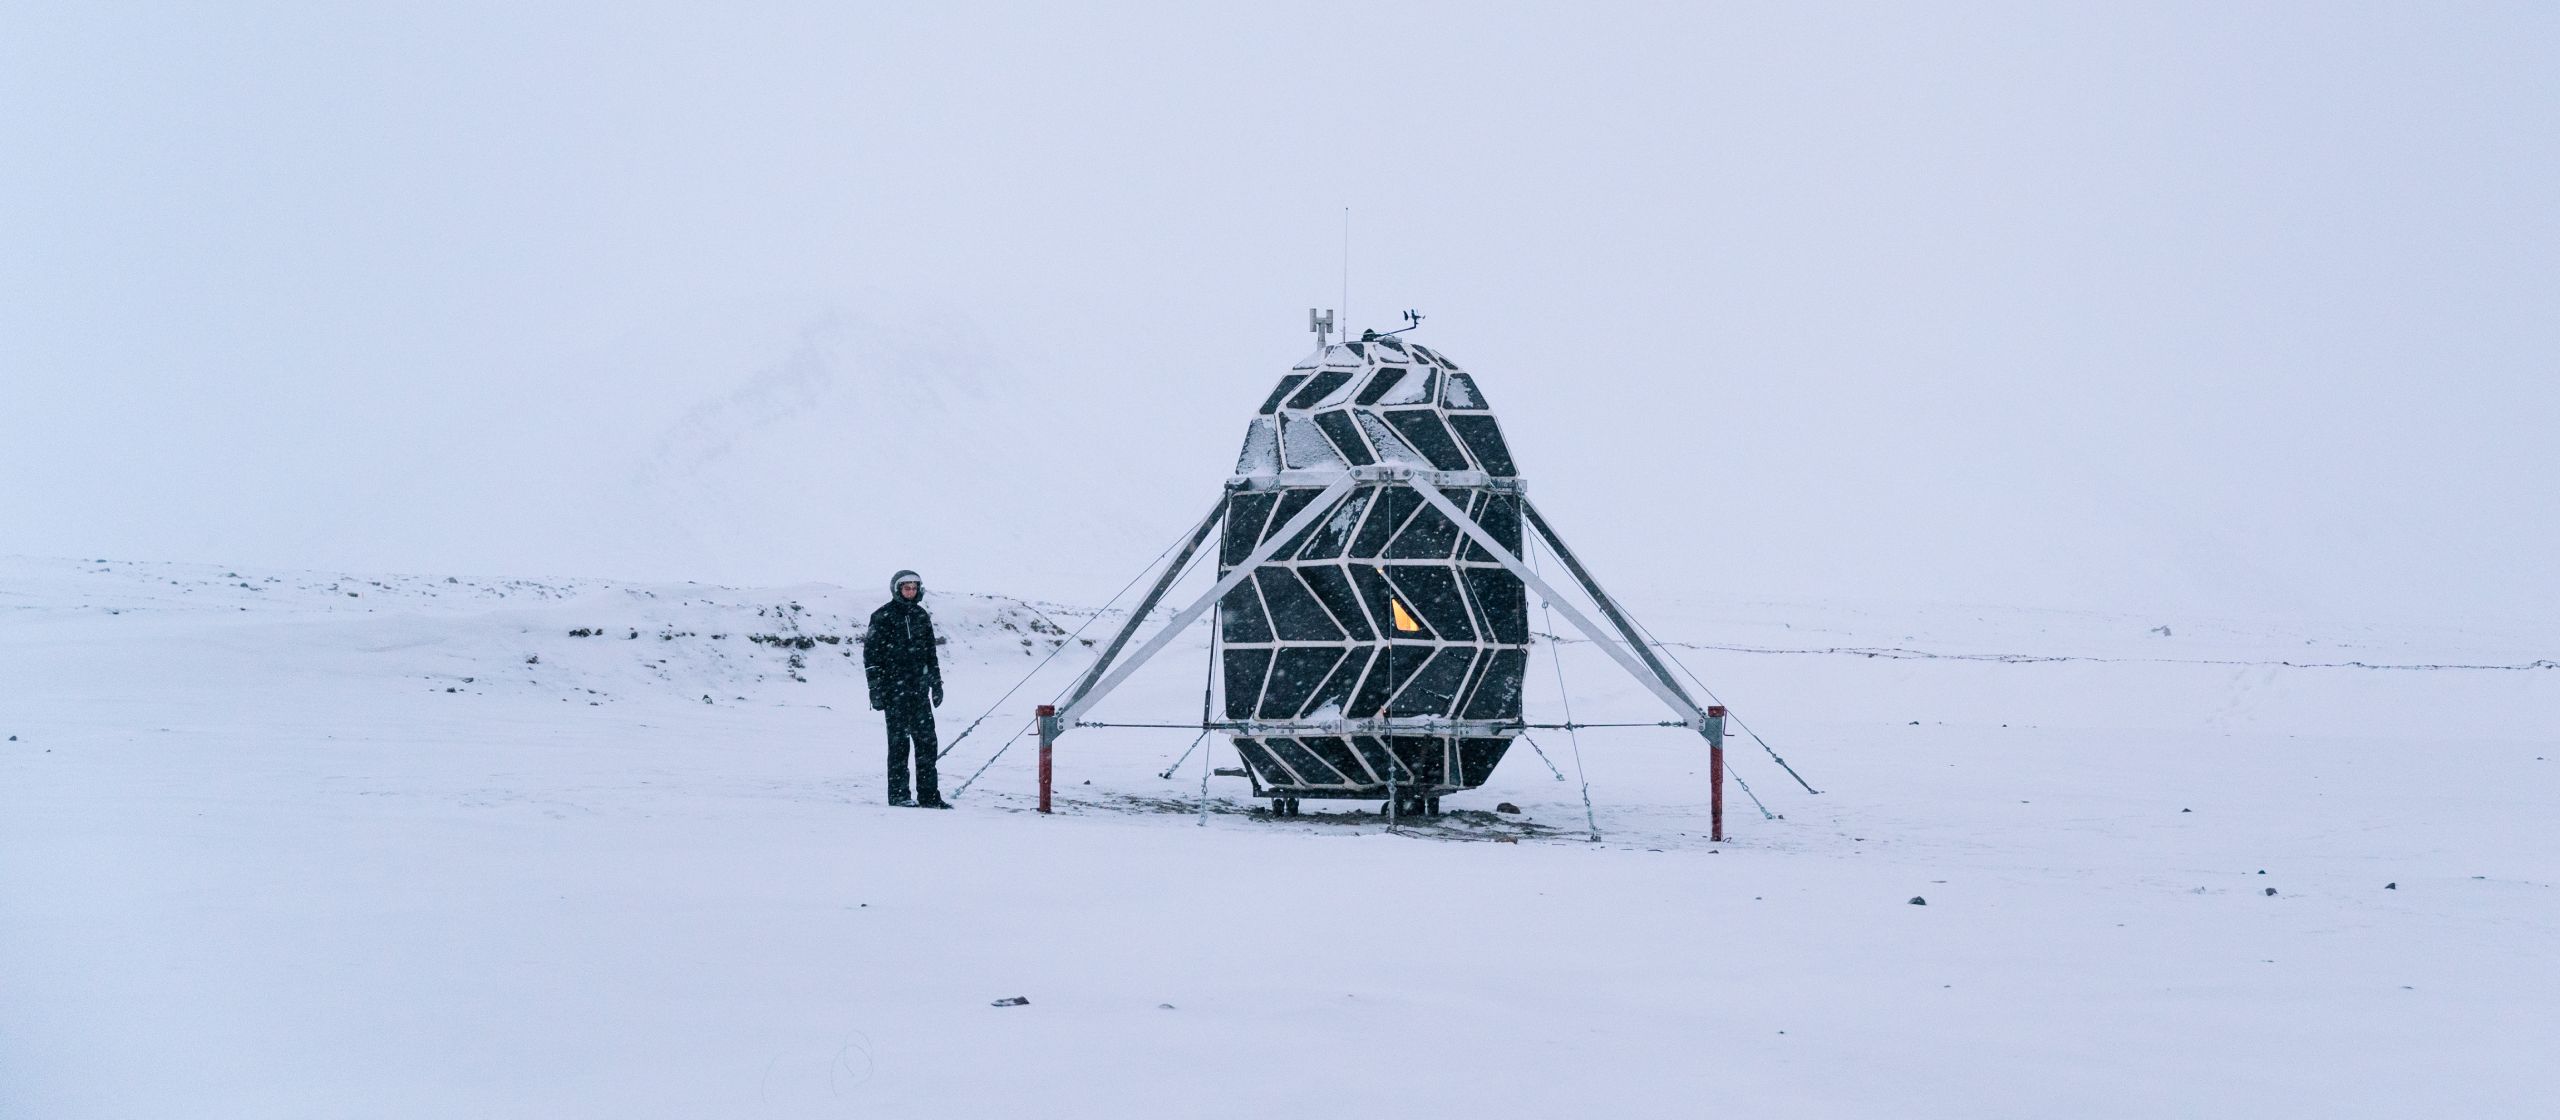 Image of the Lunark habitat in snow with a crew member standing next to it